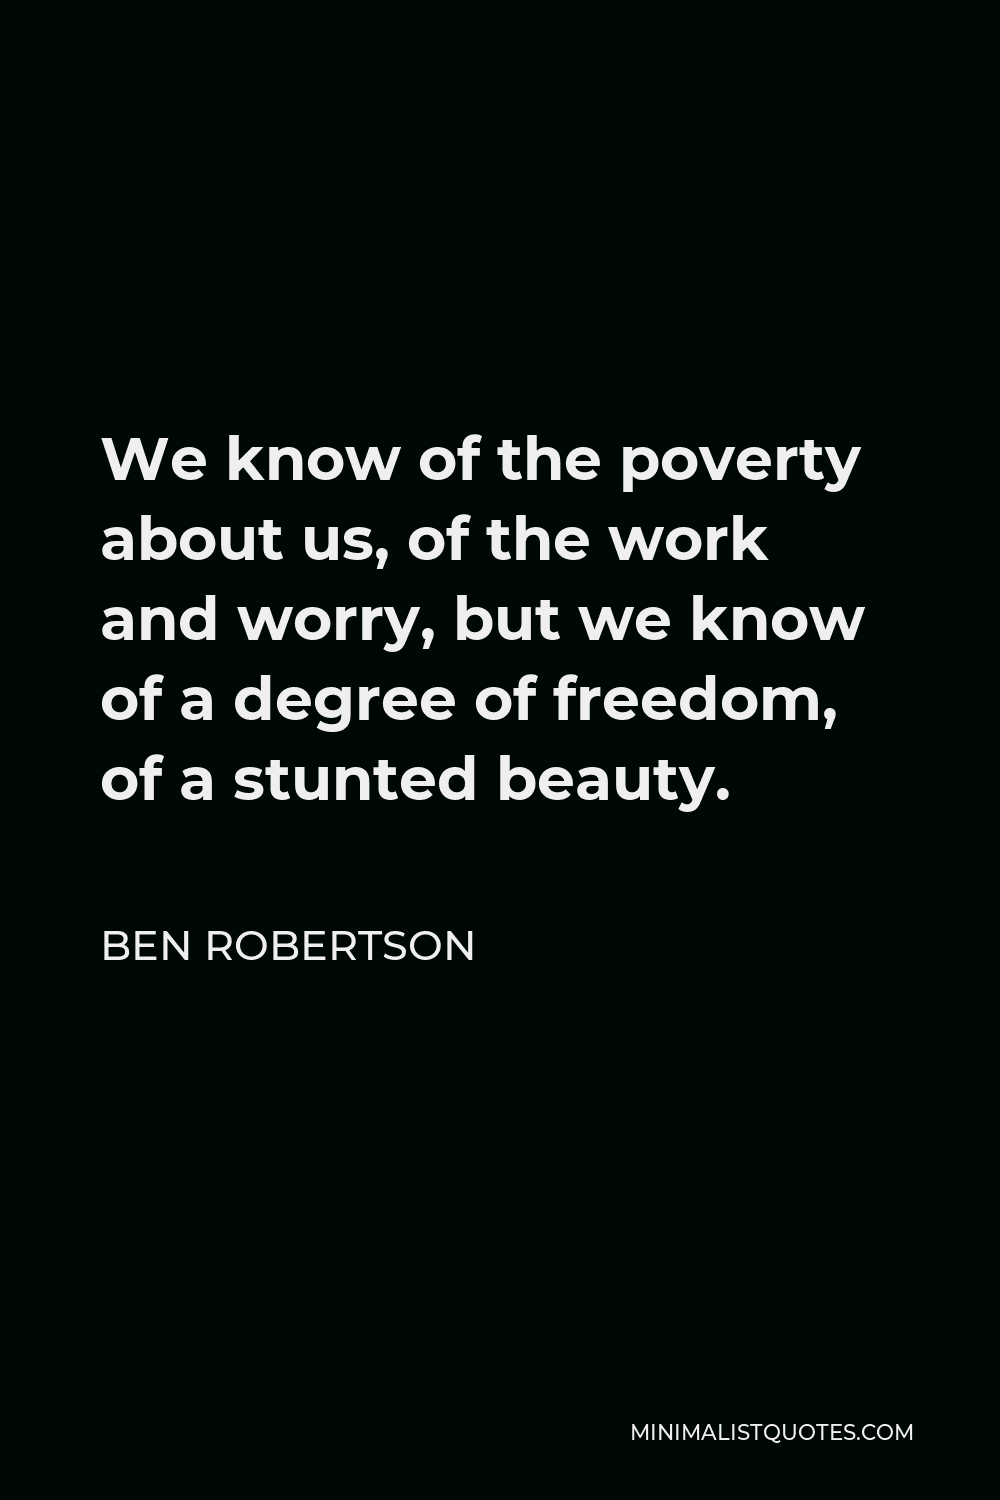 Ben Robertson Quote - We know of the poverty about us, of the work and worry, but we know of a degree of freedom, of a stunted beauty.